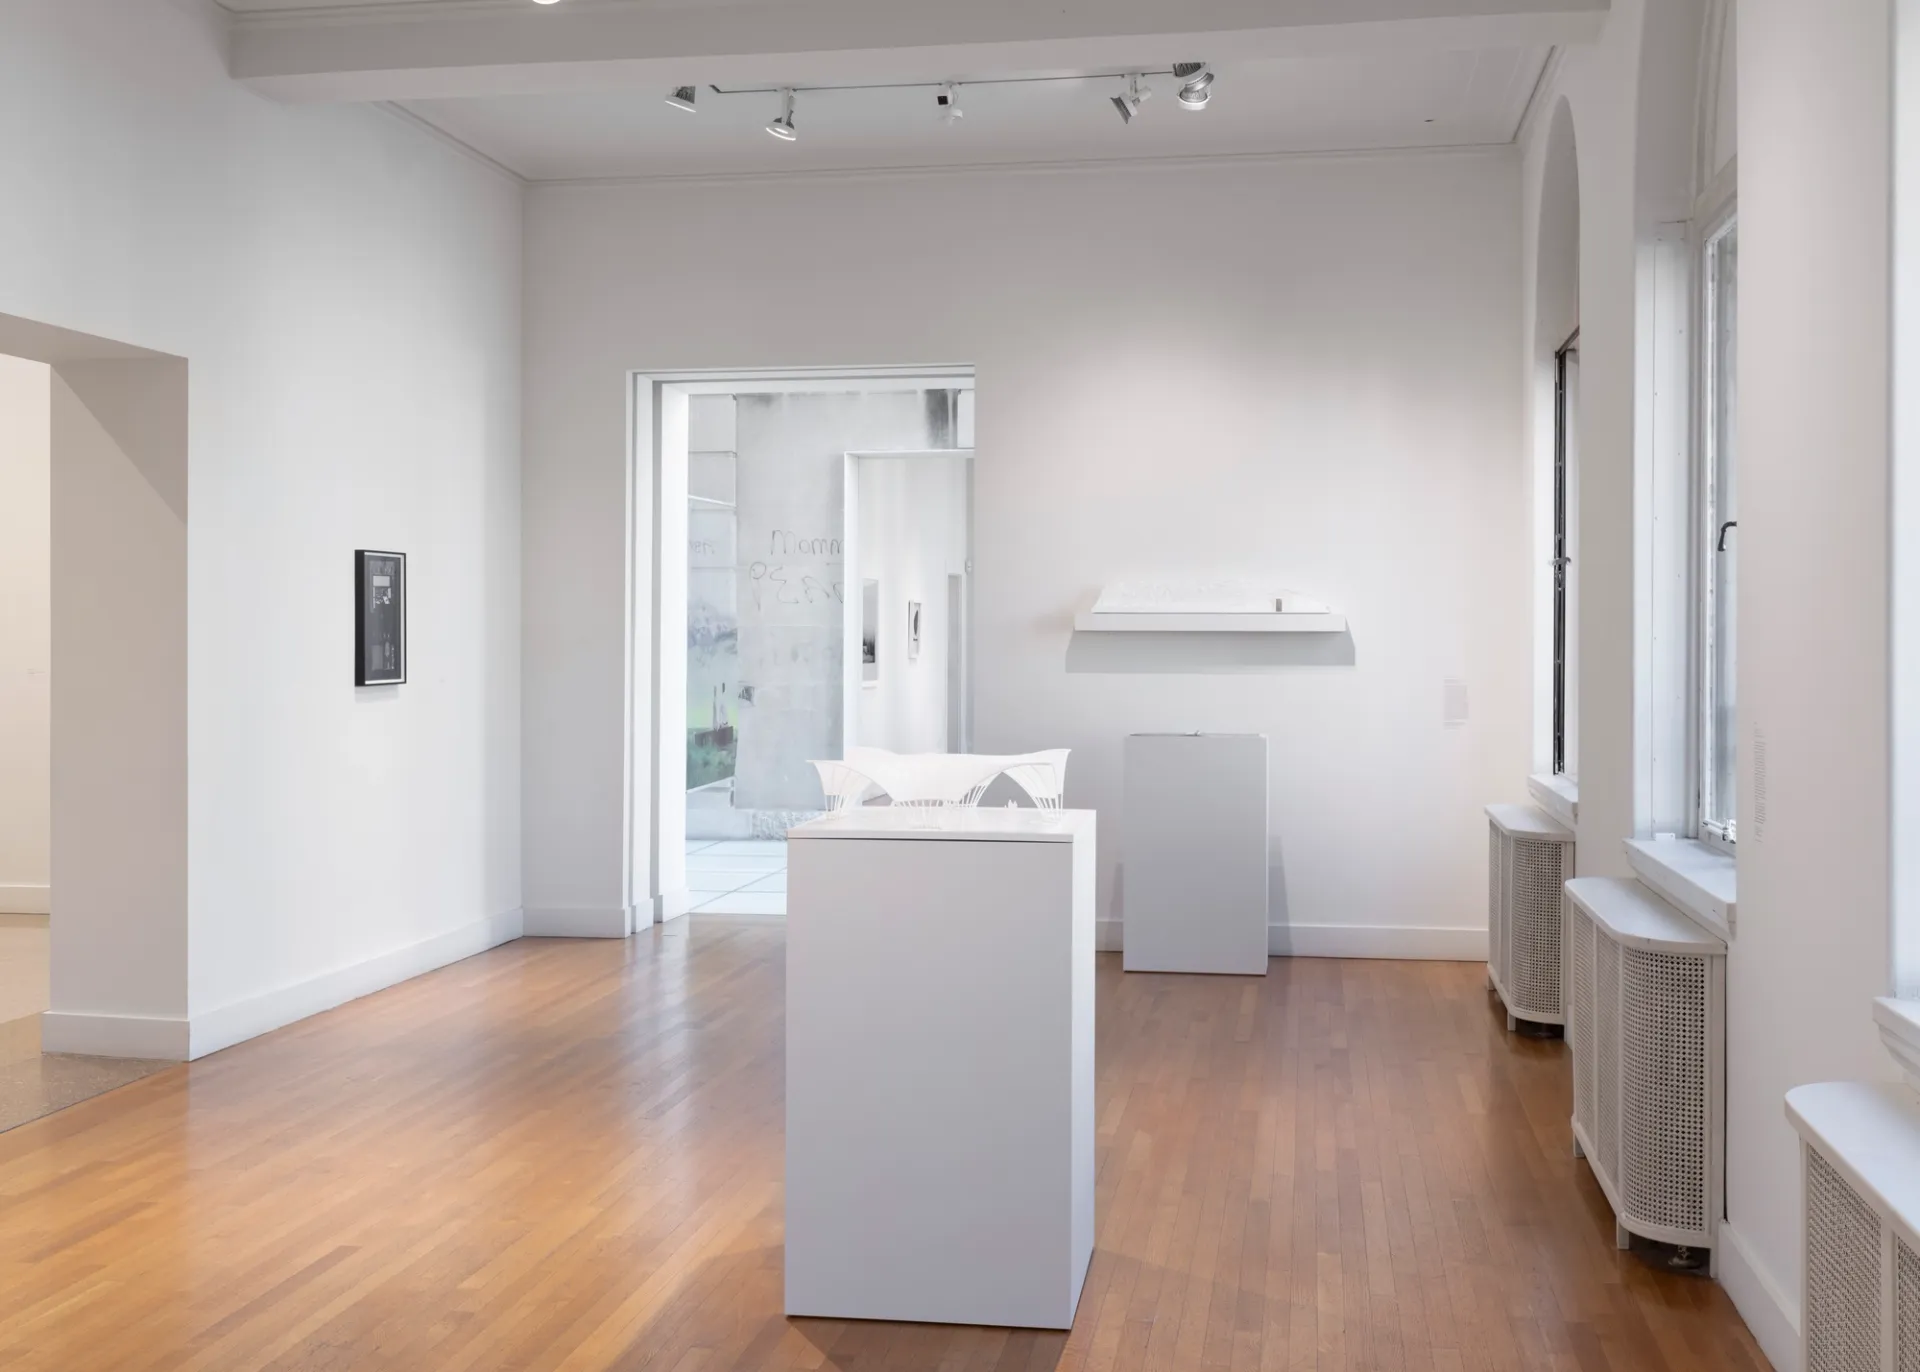 White architectural models sit positioned inside a room and on a wall to the right. To the left, a single framed artwork is on the wall. A gallery ahead on the left contains more artworks.